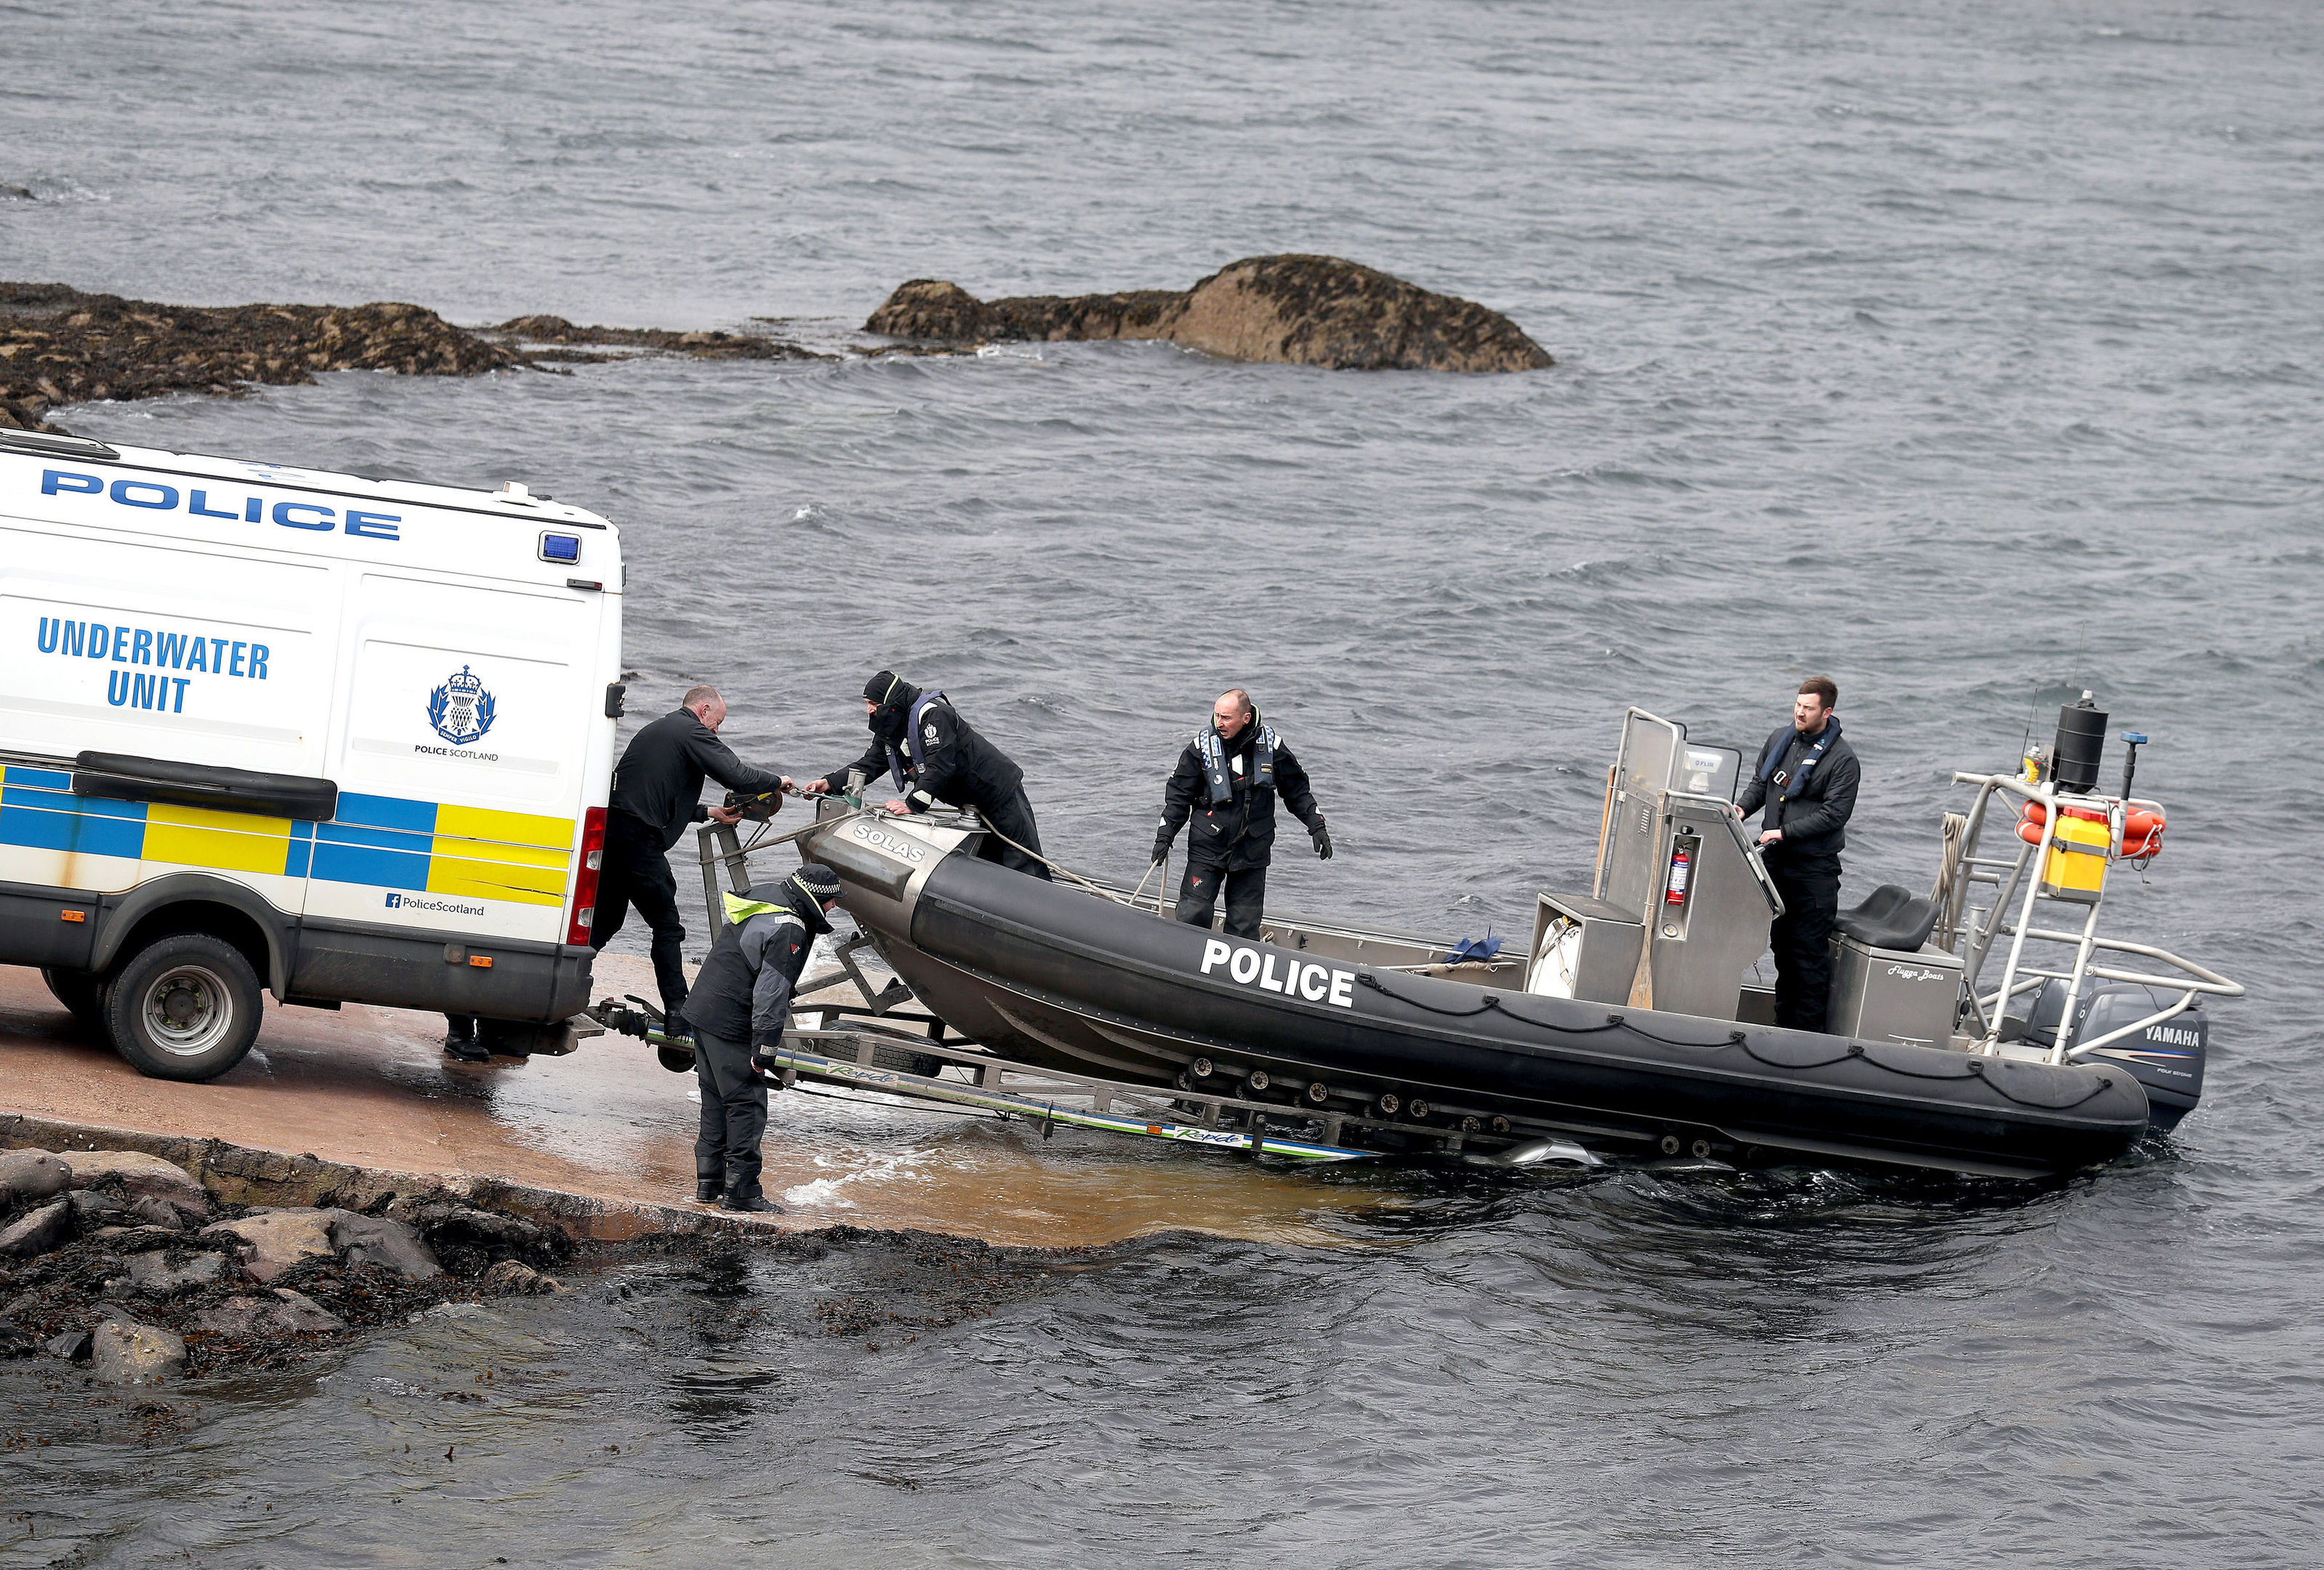 This underwater unit boat enters the water on Loch Fyne in Tarbert, Scotland, as Police Scotland continue their operation to recover the wreck of capsized fishing boat Nancy Glen after it sank on January 18 and resulted in the loss of fishermen Duncan MacDougall and Przemek Krawczyk. PRESS ASSOCIATION Photo. Picture date: Wednesday April 11, 2018. See PA story RESCUE Fisherman. Photo credit should read: Andrew Milligan/PA Wire